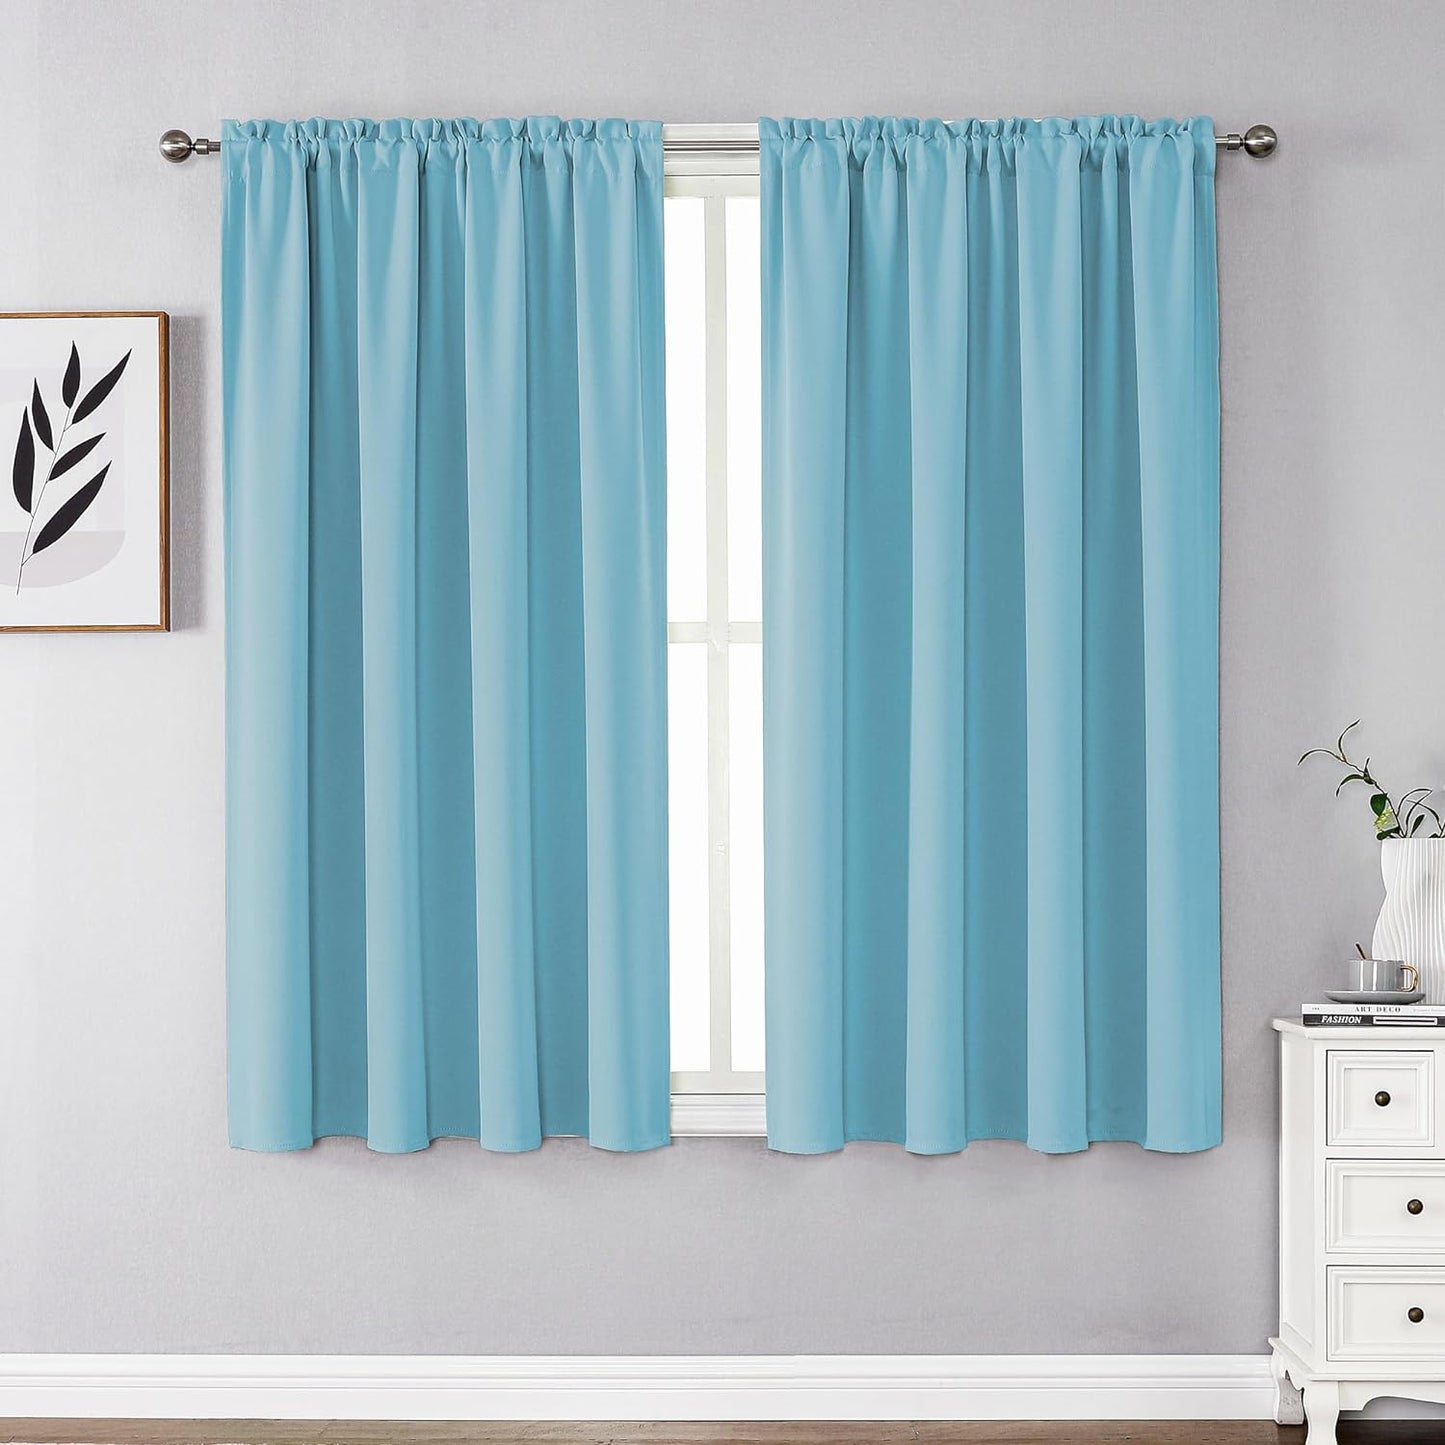 CUCRAF Blackout Curtains 84 Inches Long for Living Room, Light Beige Room Darkening Window Curtain Panels, Rod Pocket Thermal Insulated Solid Drapes for Bedroom, 52X84 Inch, Set of 2 Panels  CUCRAF Light Blue 52W X 54L Inch 2 Panels 